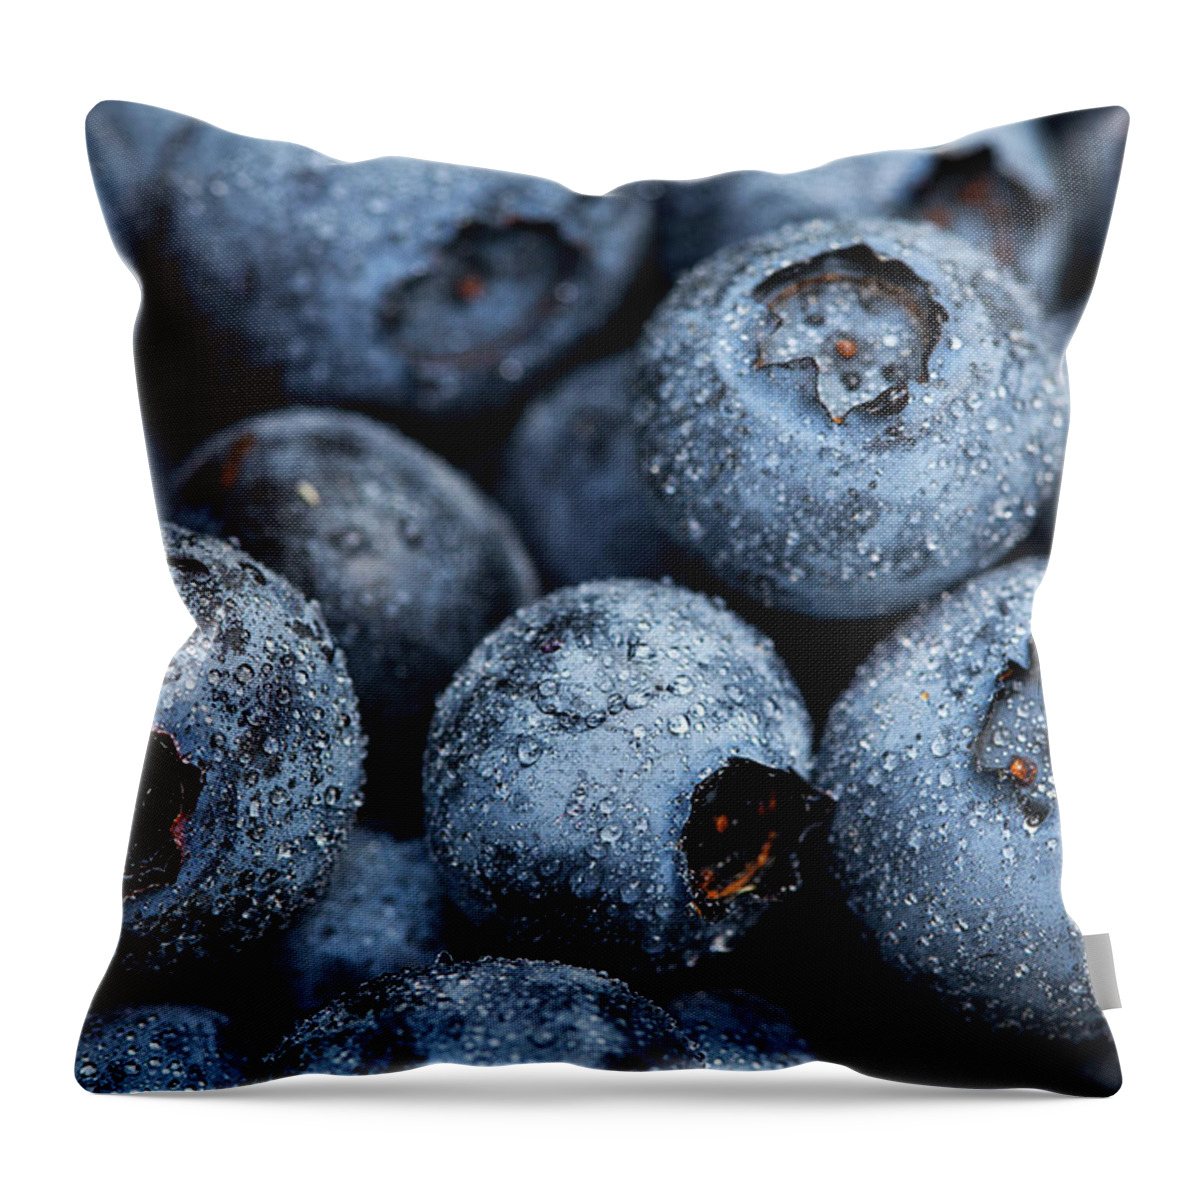 Surrey Throw Pillow featuring the photograph Blueberries Fruits by Kevin Van Der Leek Photography